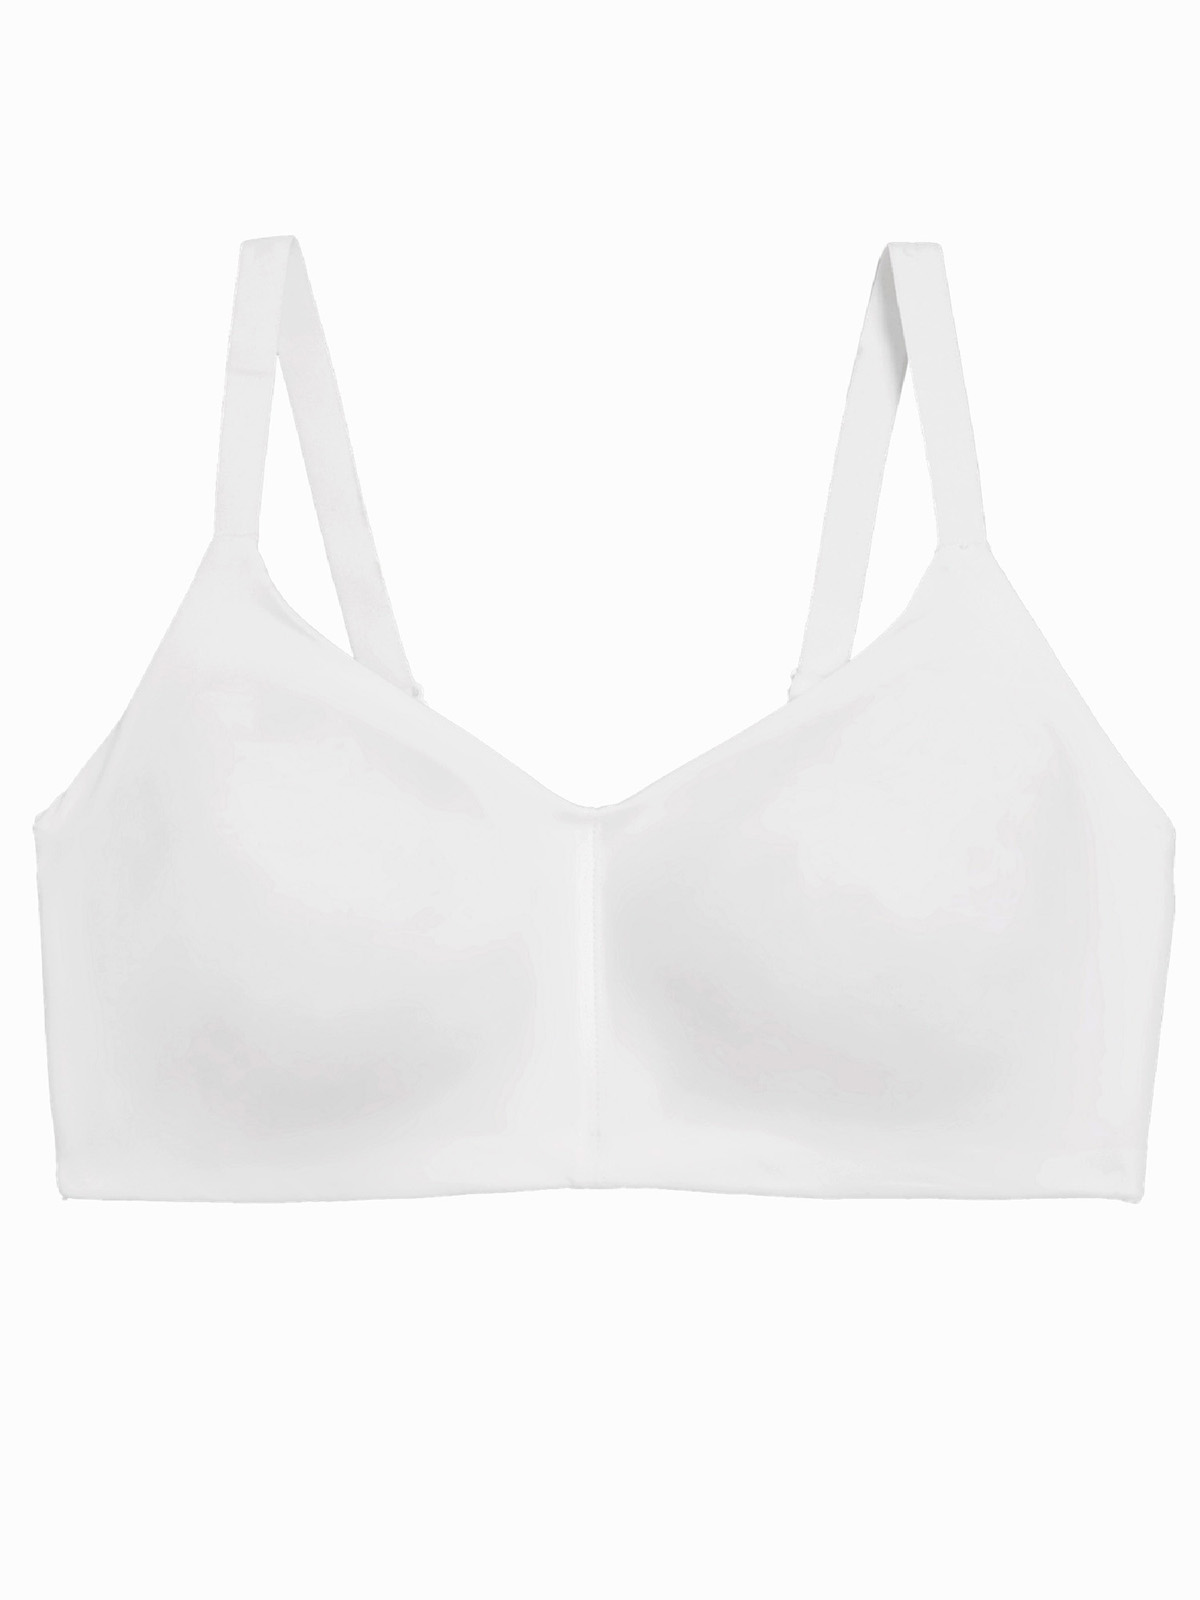 Marks and Spencer - - IRREGULAR - M&5 WHITE Flexifit Non-Wired Full Cup ...